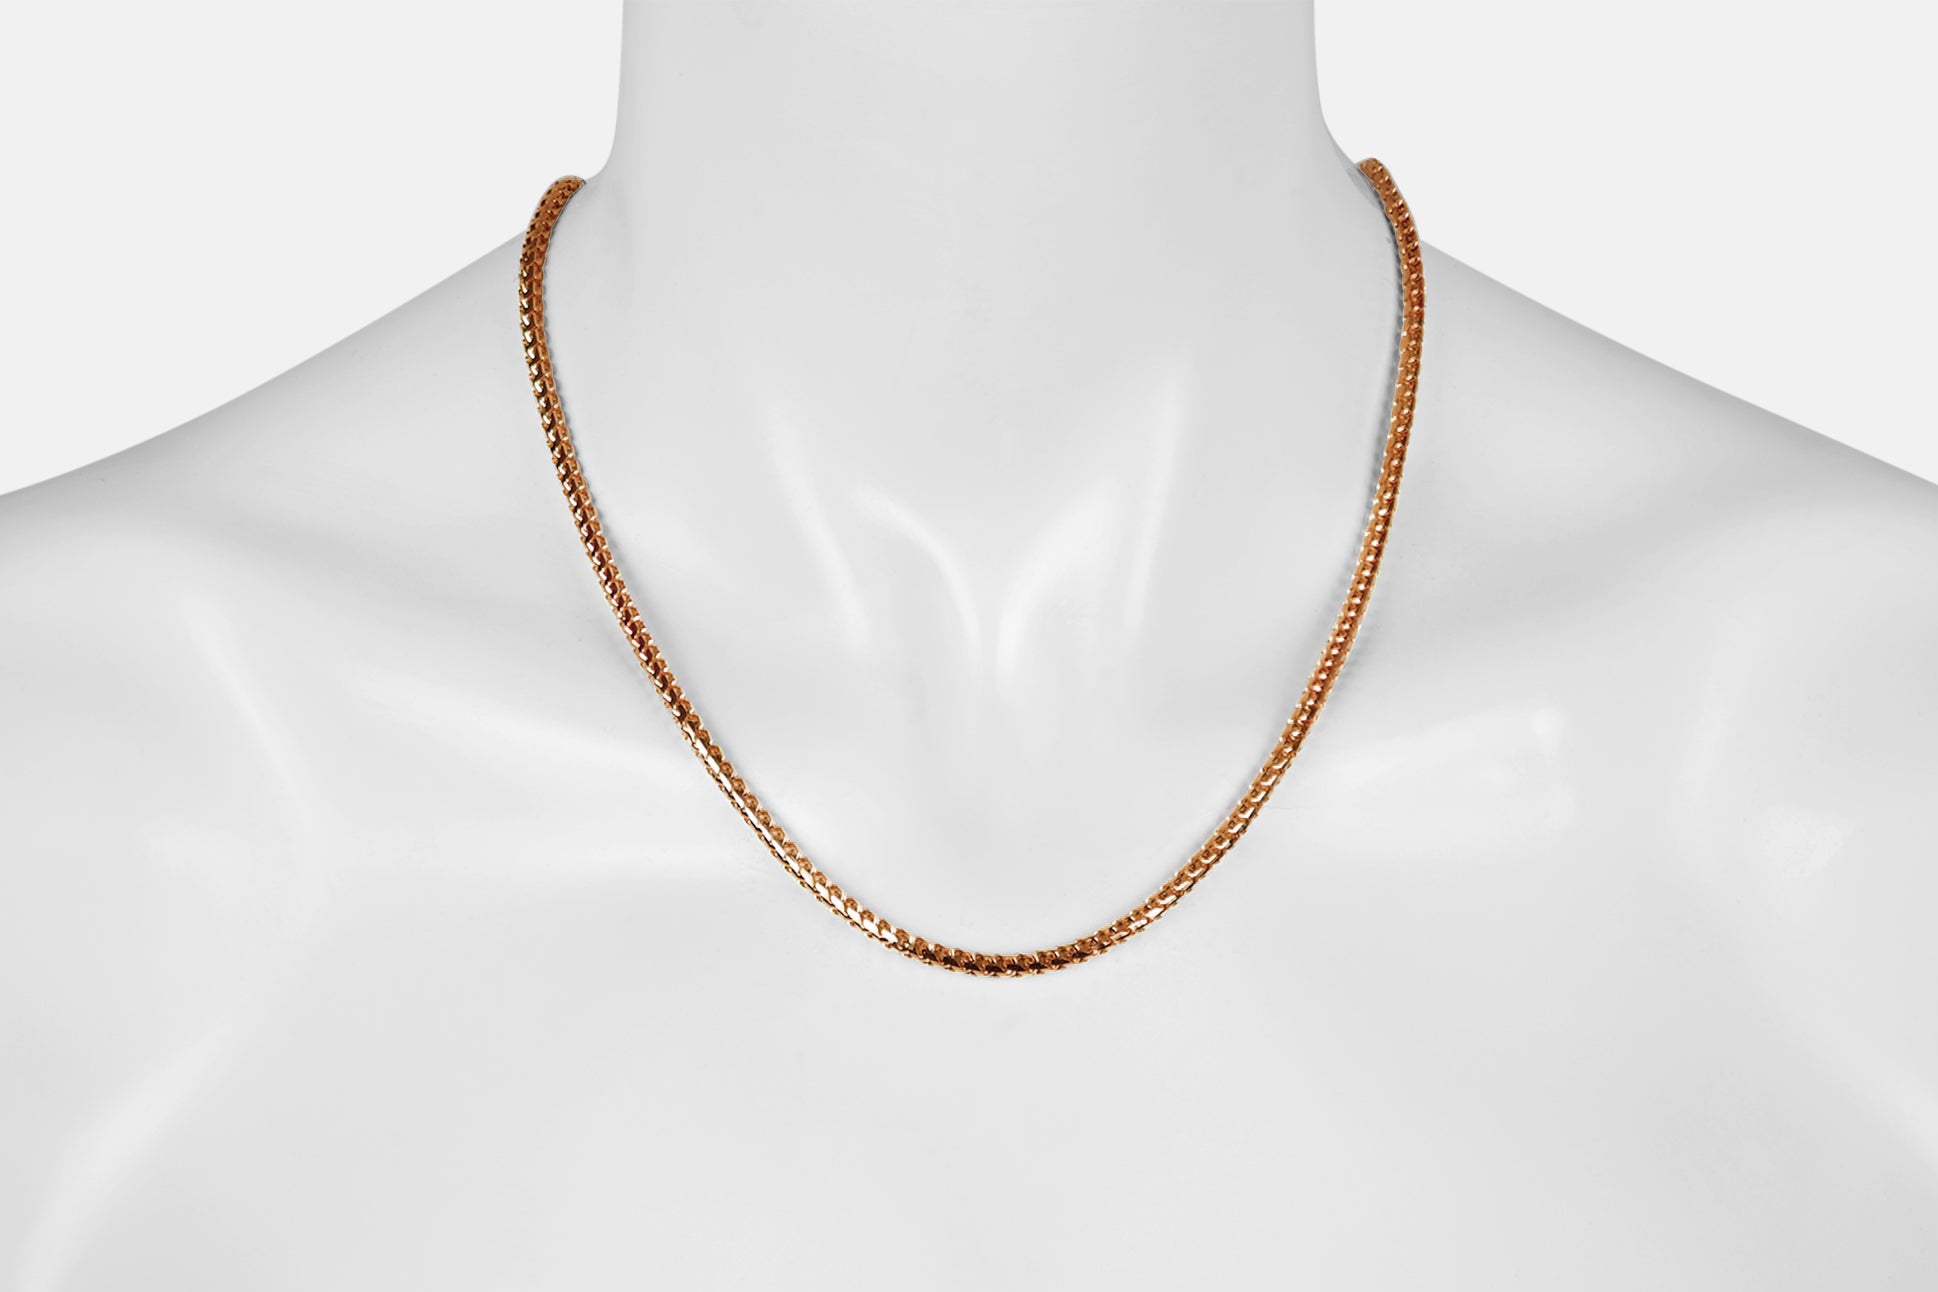 sejin jewelry Rose gold plated 2.0MM Figaro chains necklace, Delicate  dainty rose gold necklace for women men, Everyday simple chain, 16-30 inch  Available (16 inch) | Amazon.com